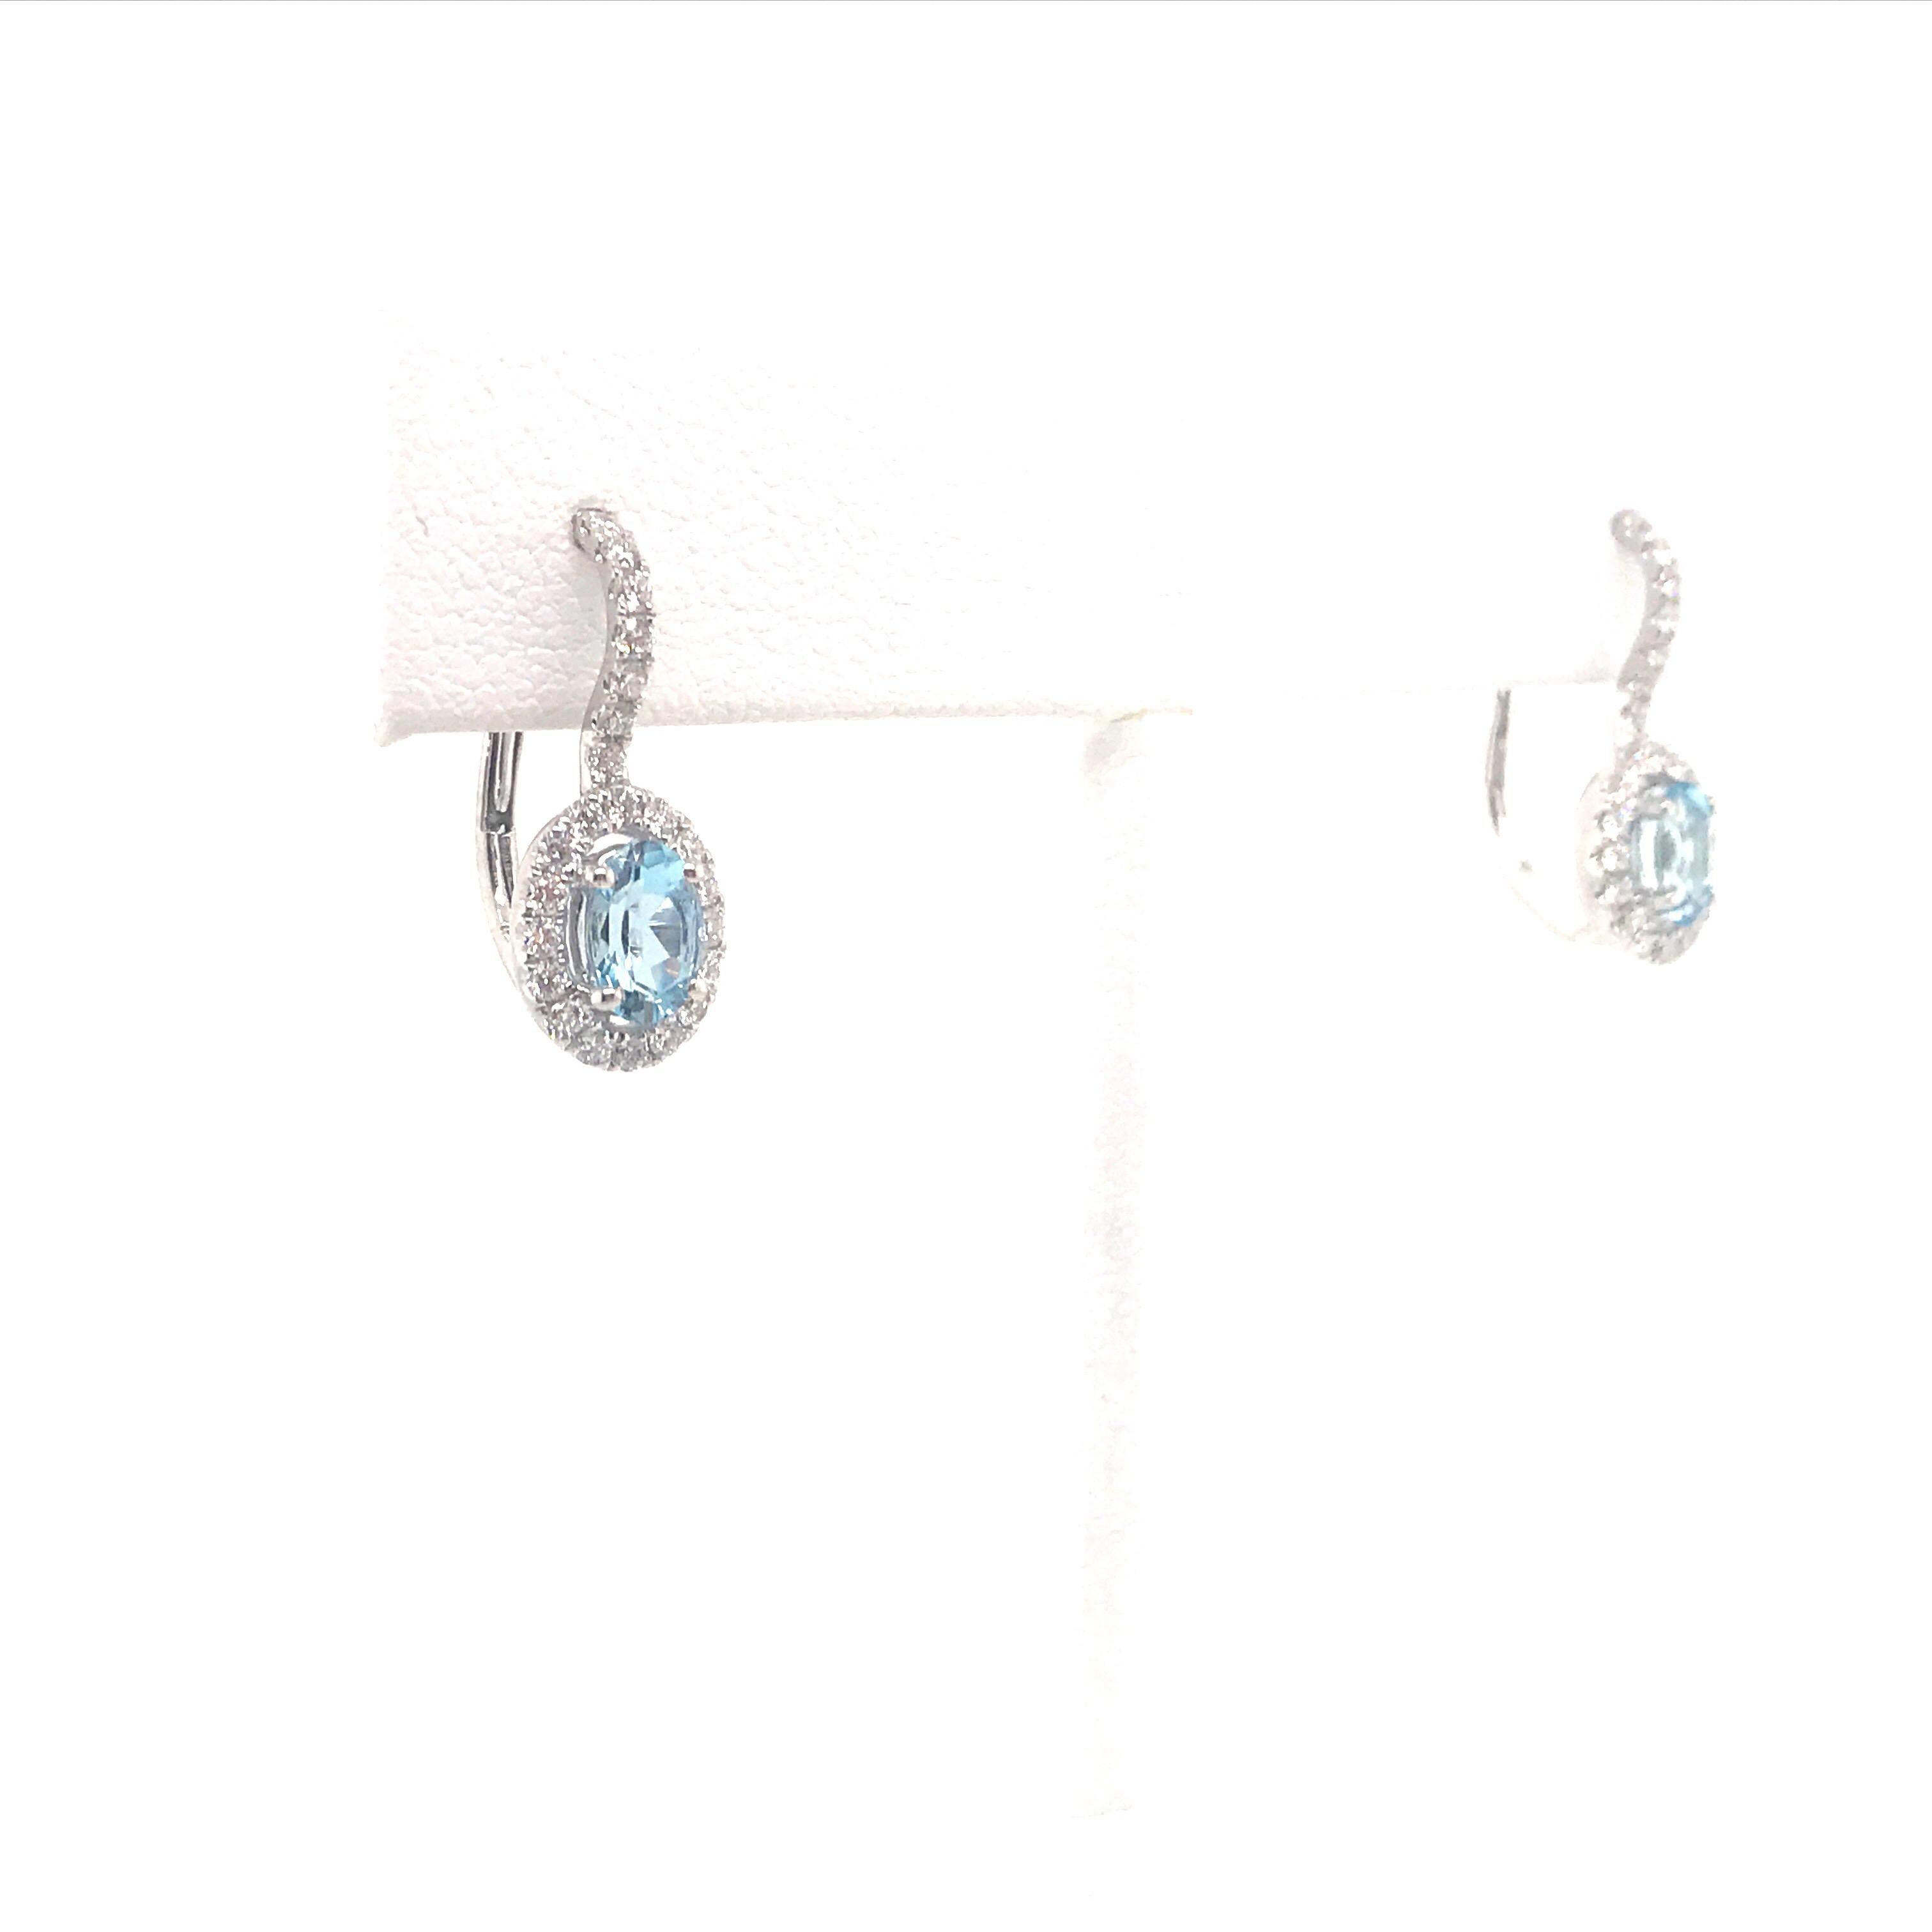 Aquamarine Diamond Drop Earrings 1.22 Carat 14 Karat White Gold In New Condition For Sale In New York, NY